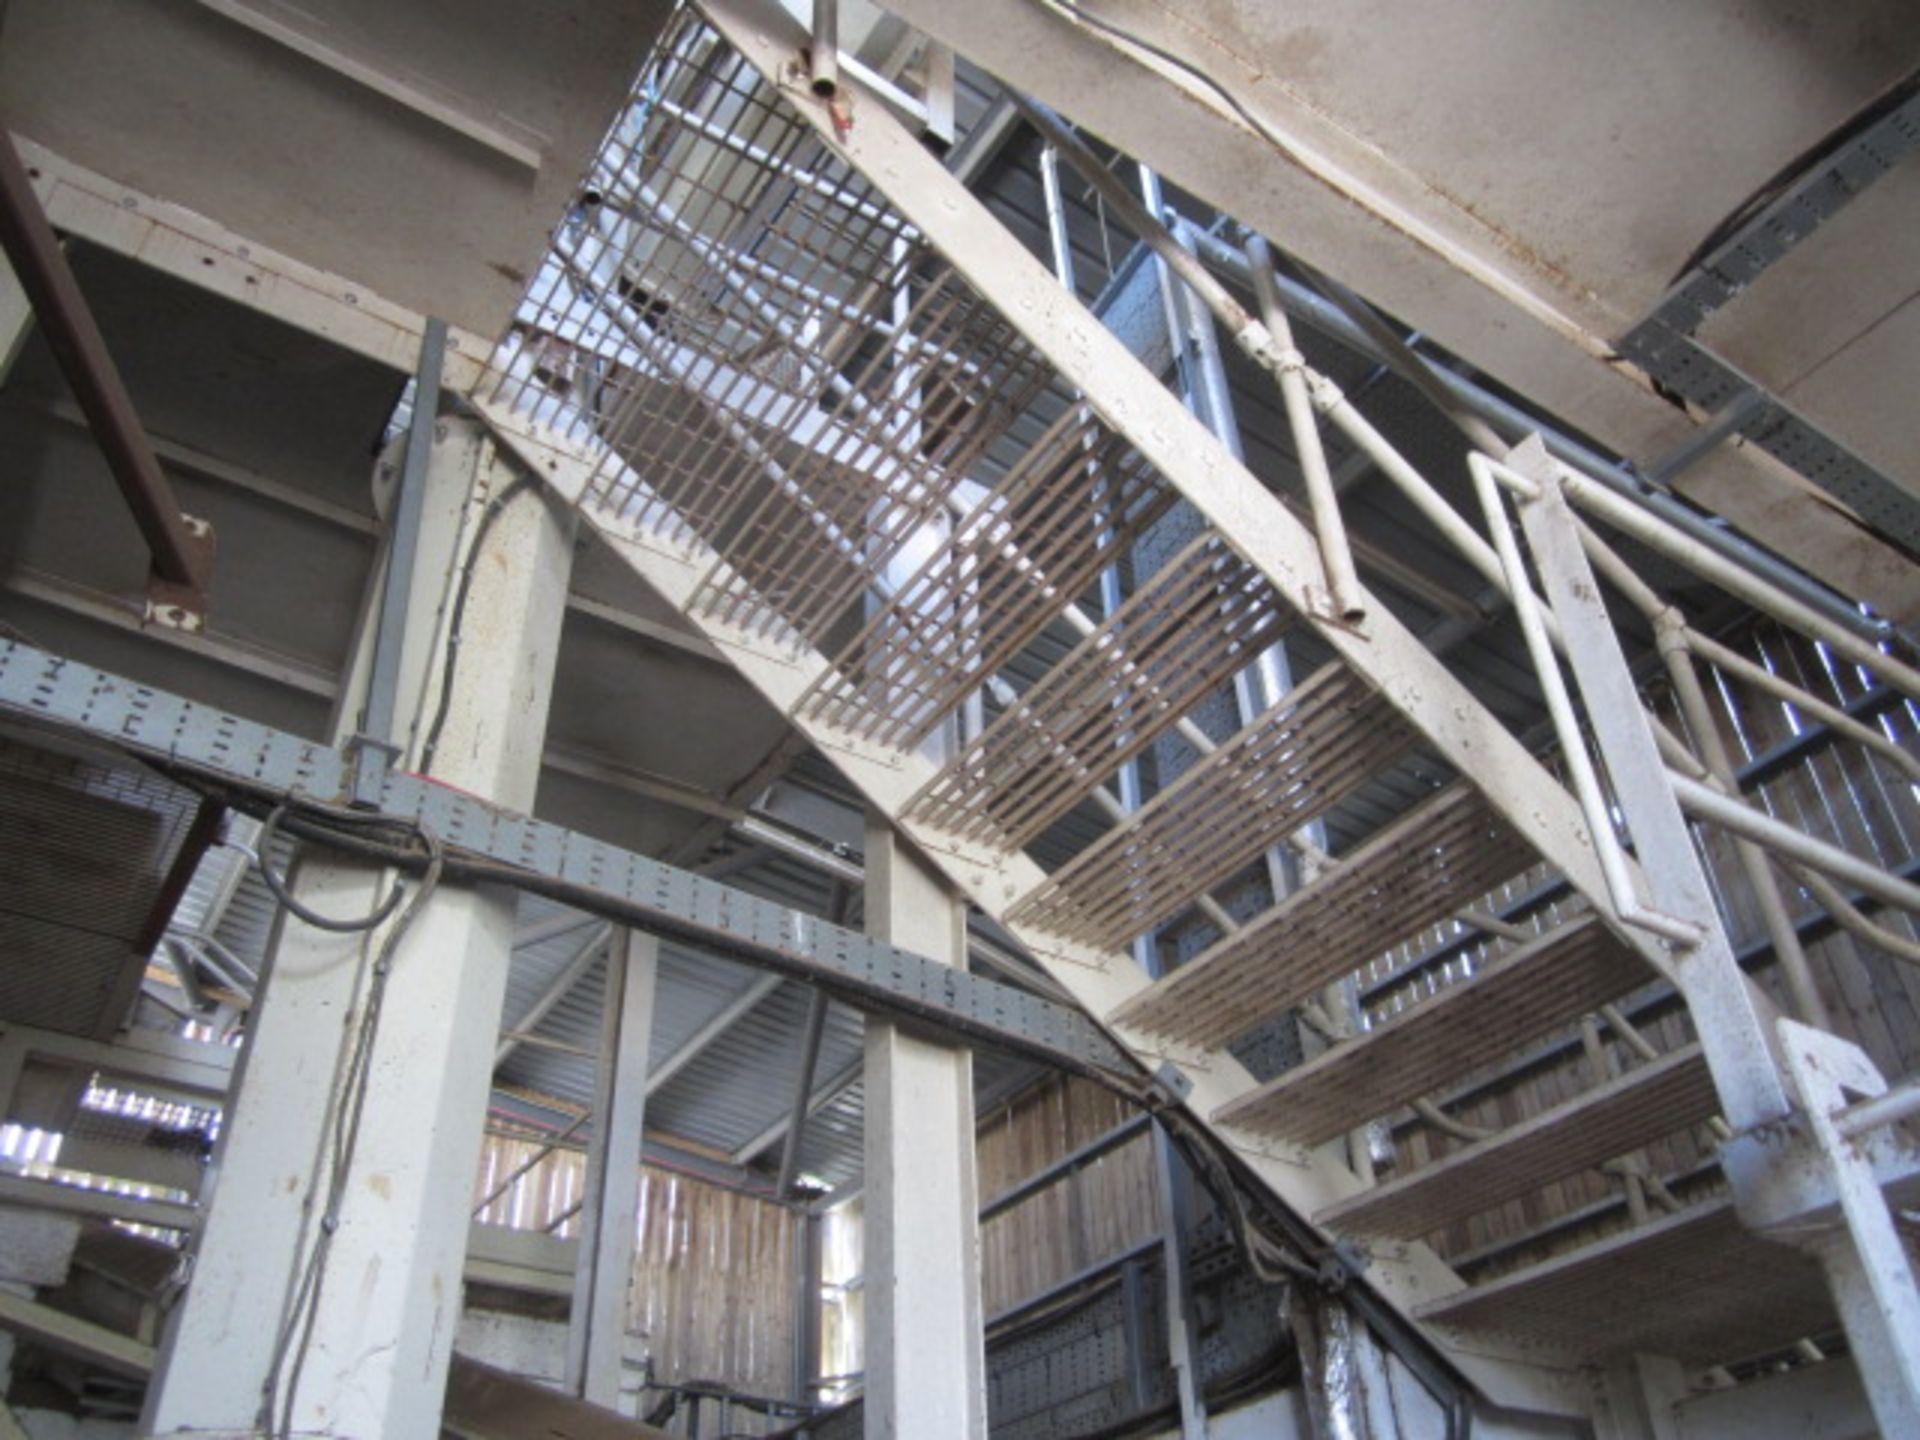 Steel framed stepped gantry access steps and platforms, approx. 8m x 4m and 1m x 12m. **A work